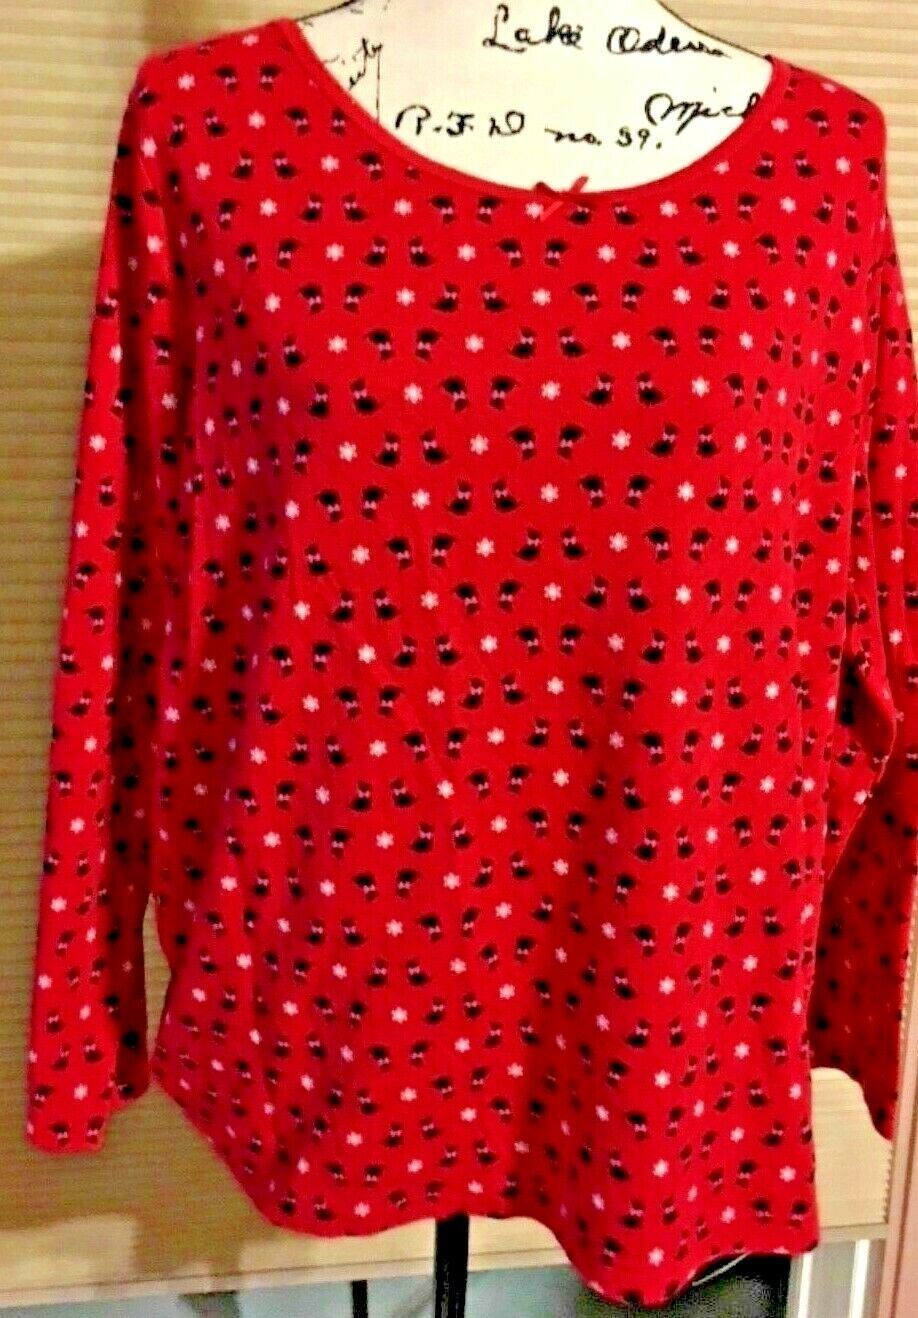 Primary image for Women’s Charter Club Sleepwear Pajama Top Red Scotty Dog Large Cotton Poly 26-23